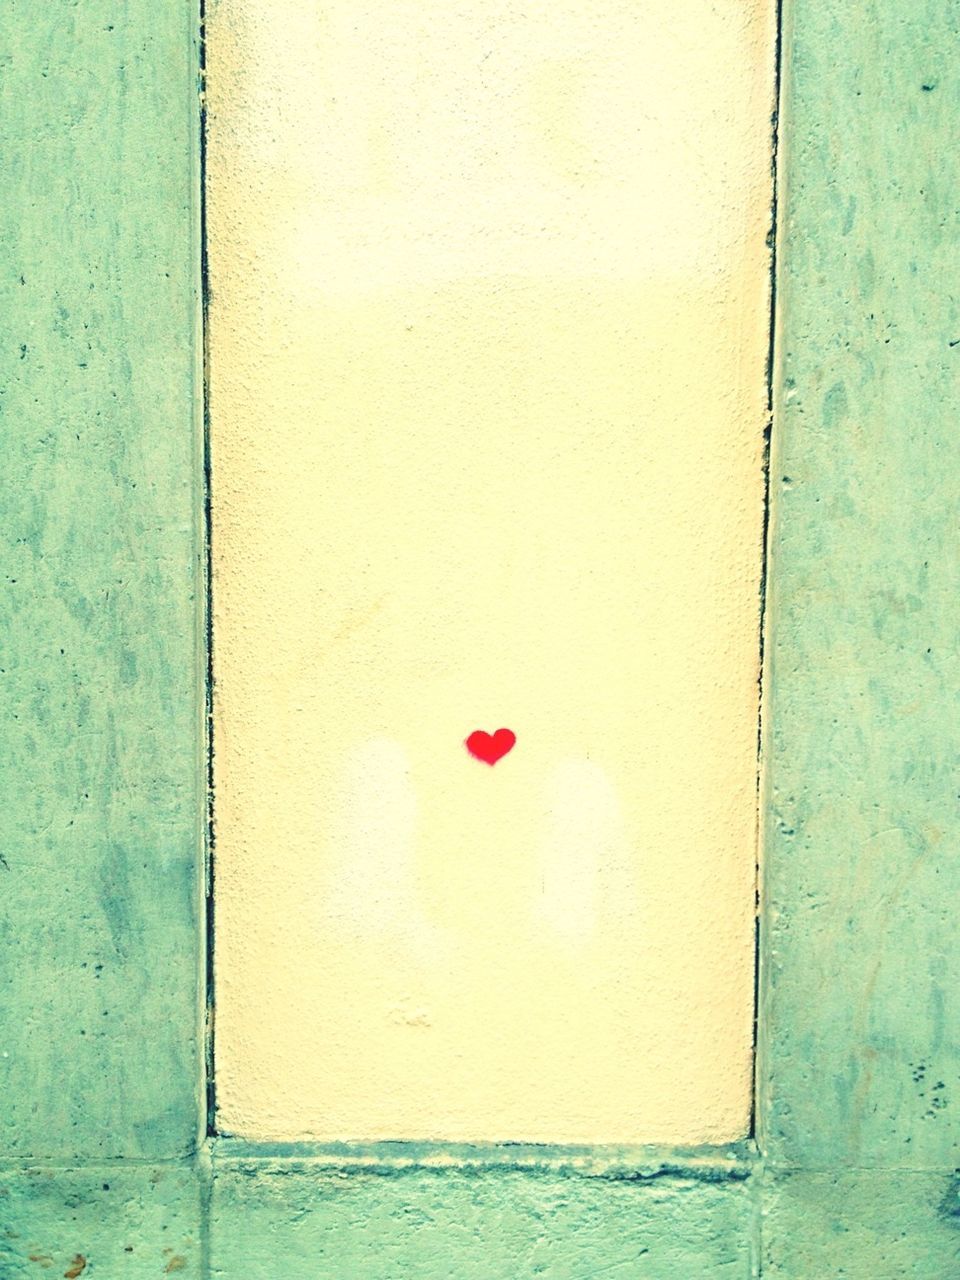 Little red heart on wall